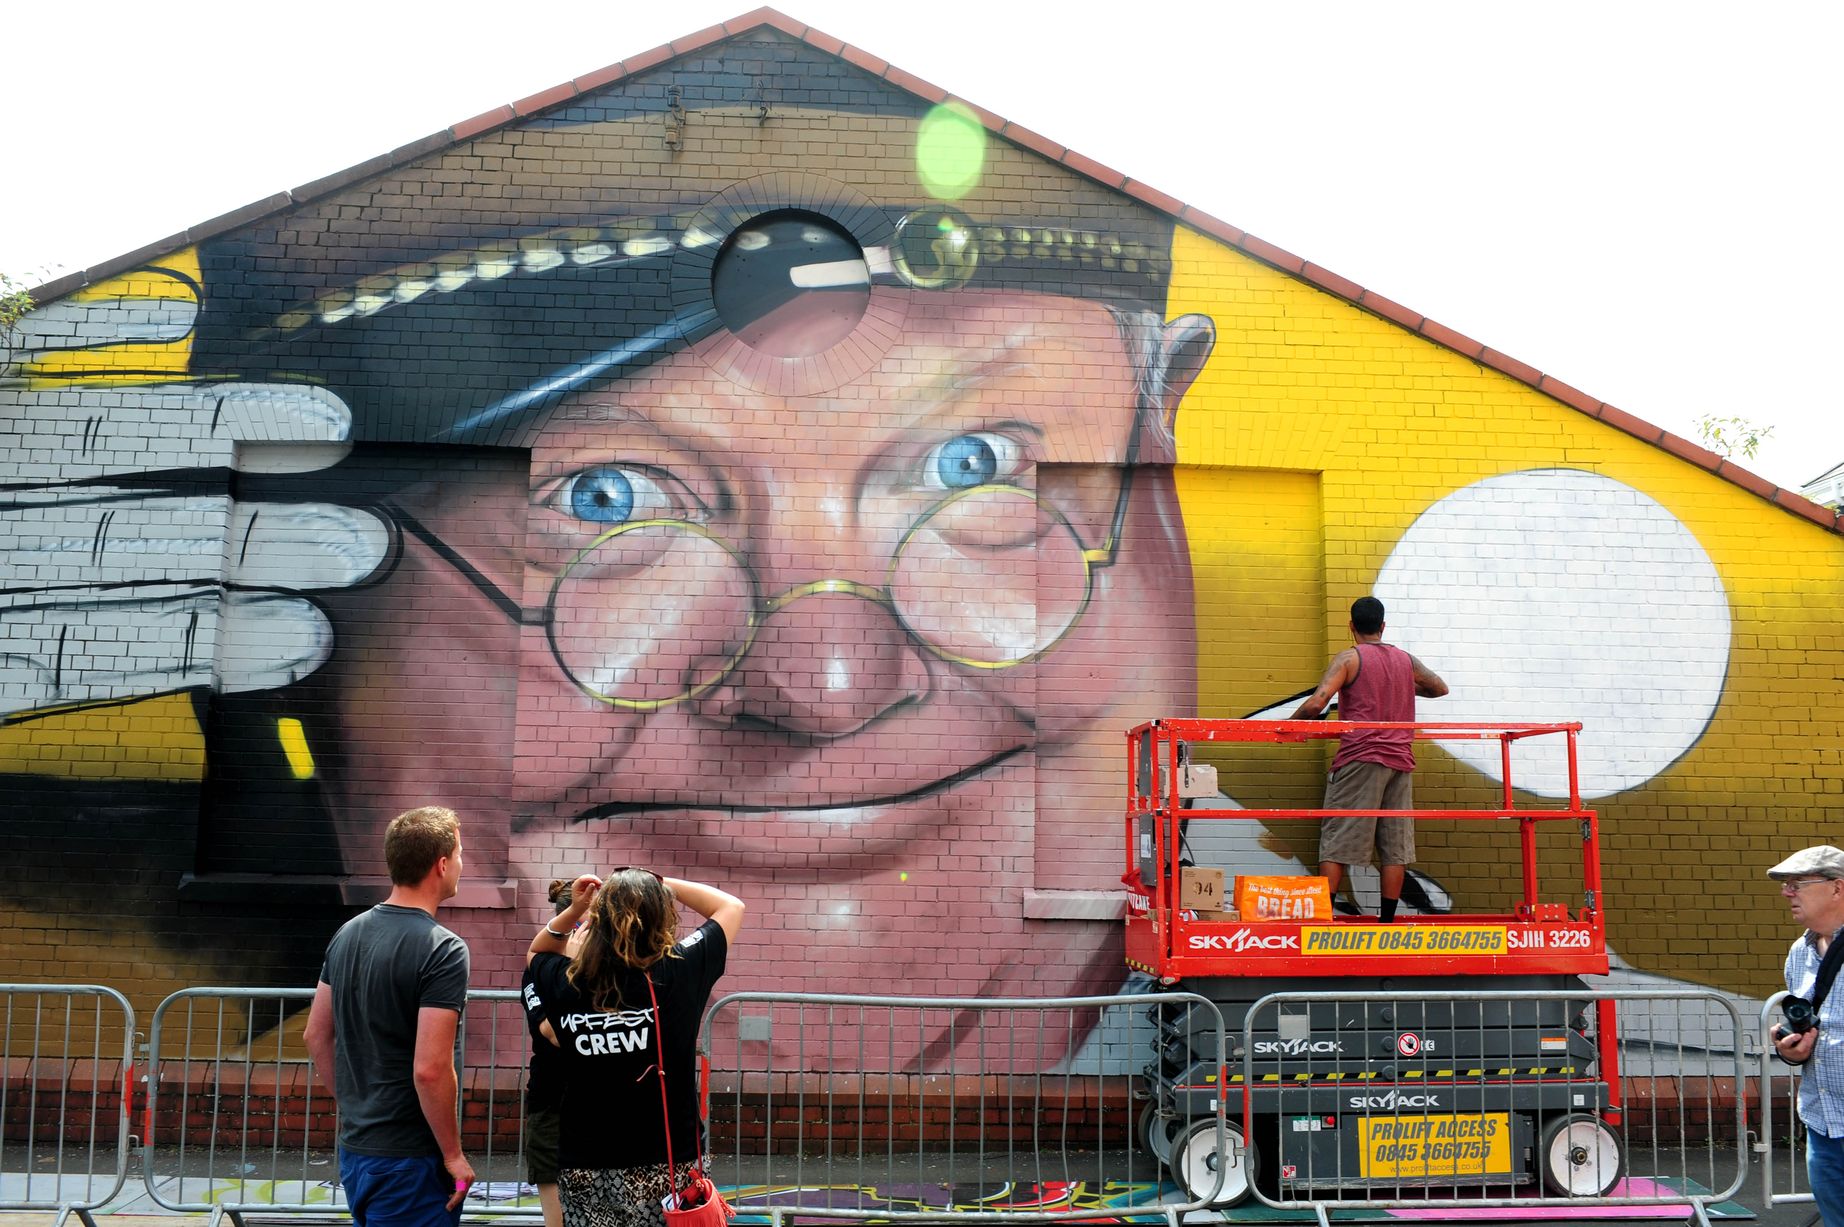 Relive the most amazing street art in Upfest's history ahead of 2017 ...